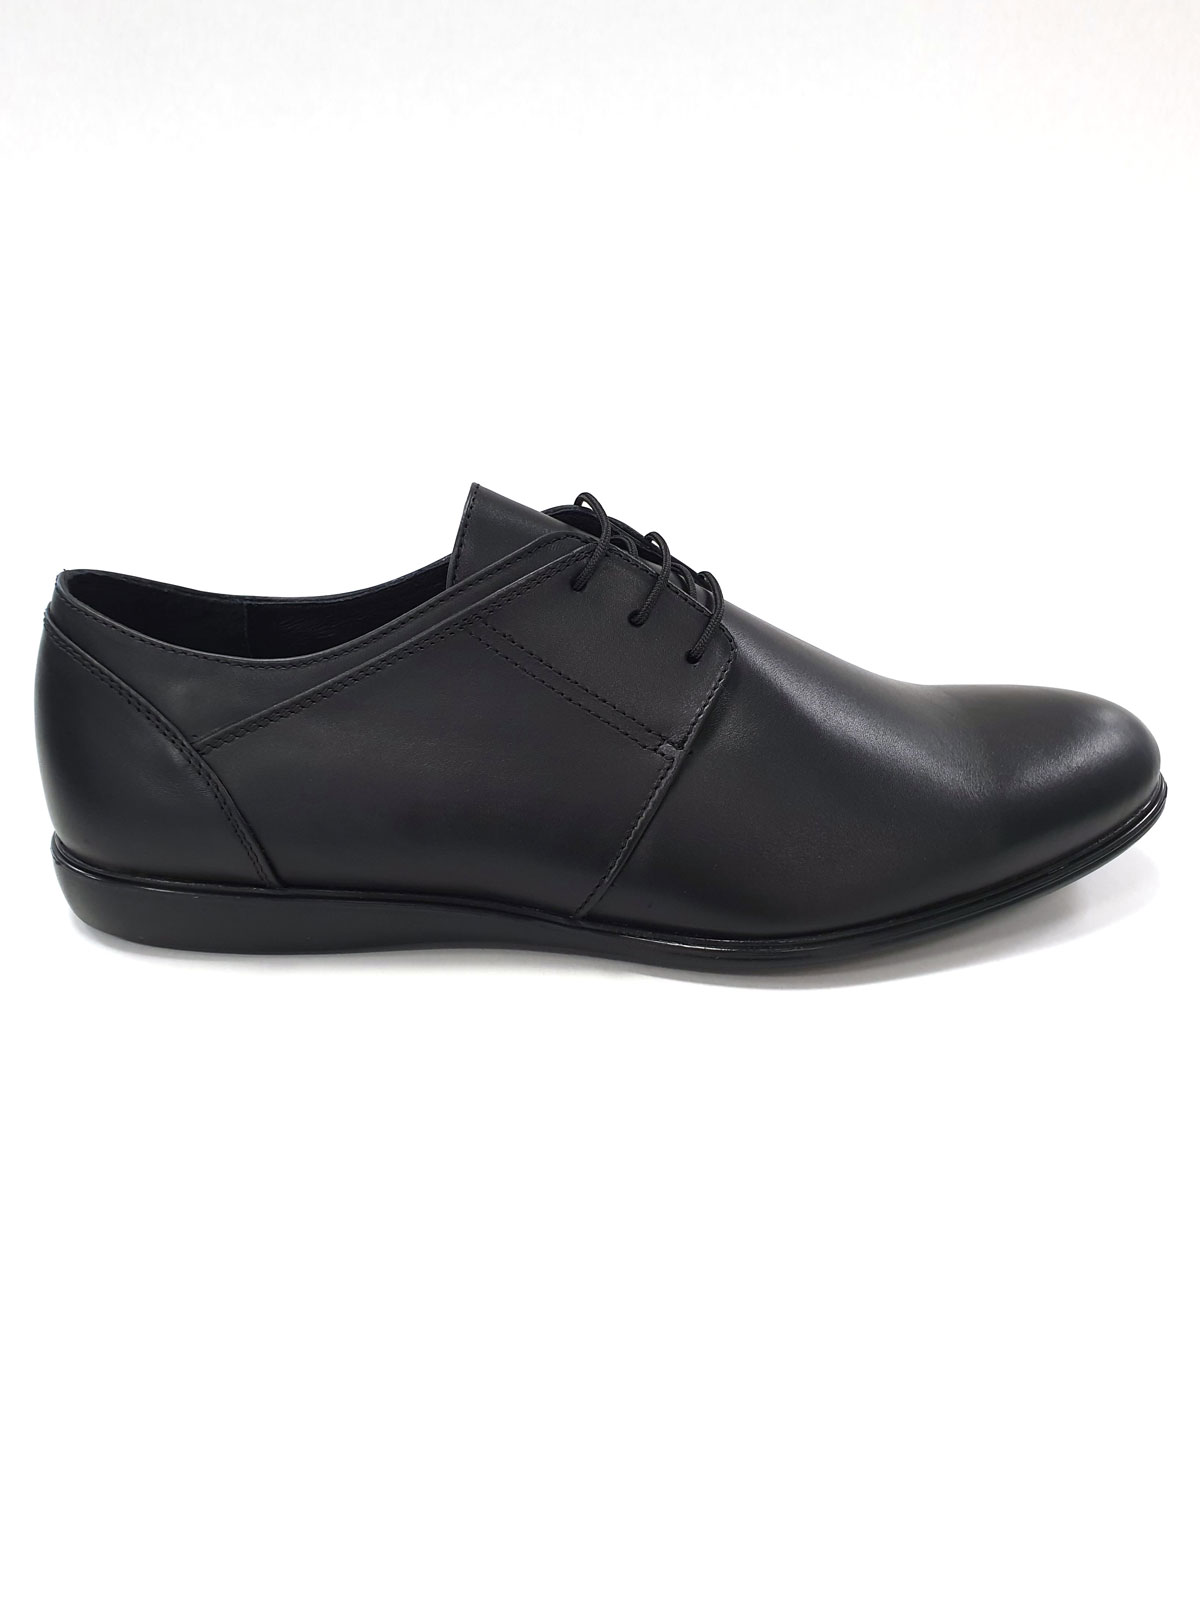 Mens shoes genuine leather - 81053 - € 55.68 img2